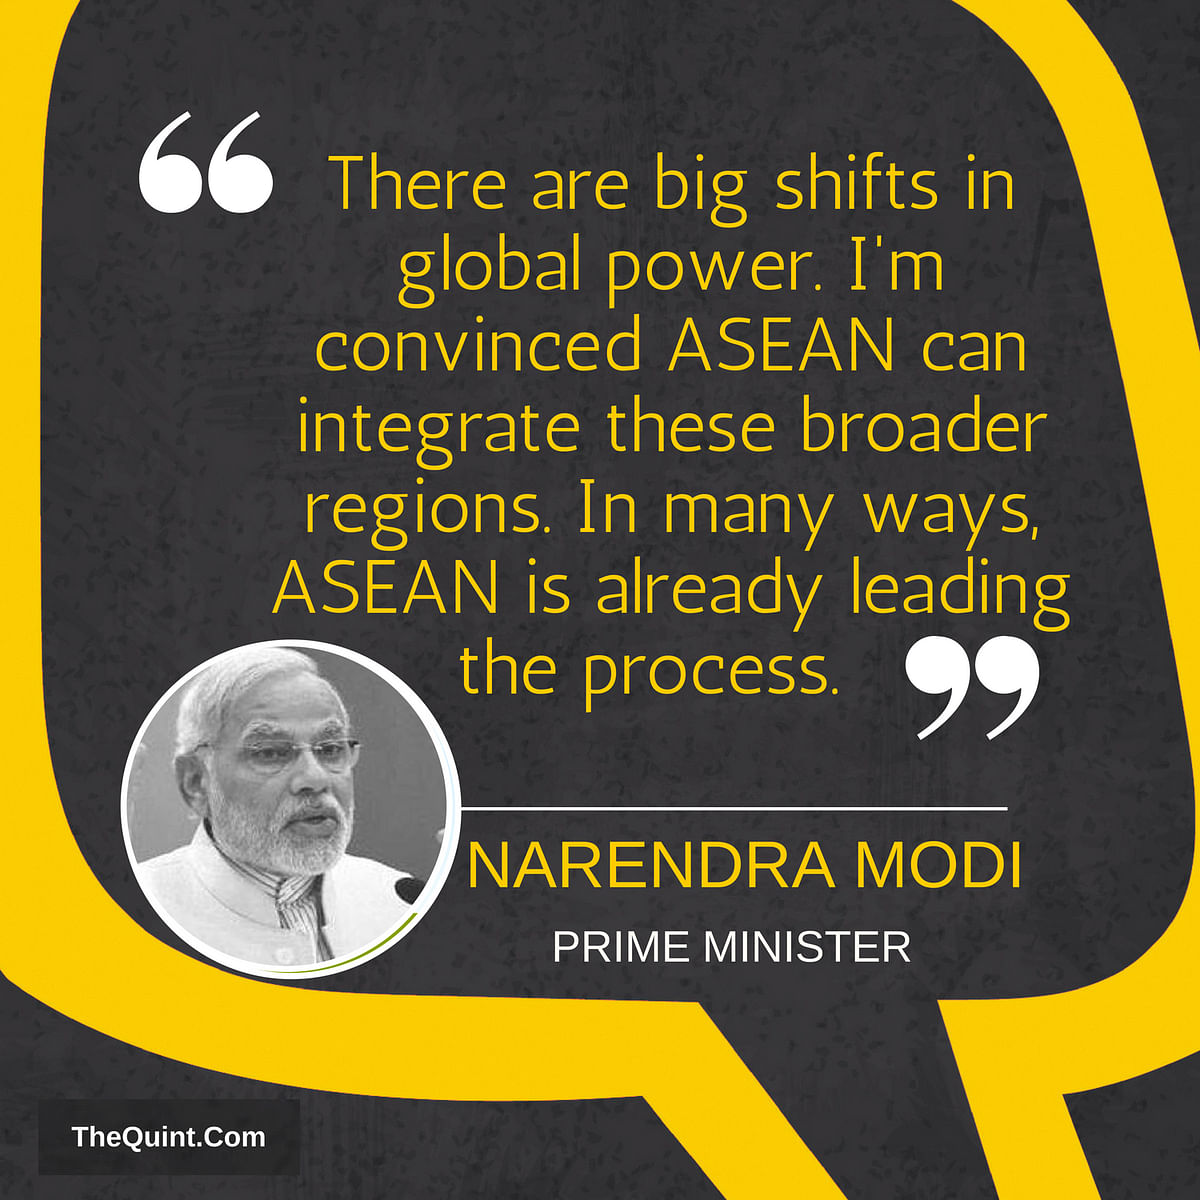 Narendra Modi is the first Indian PM to deliver the keynote address at Shangri-La Dialogue.